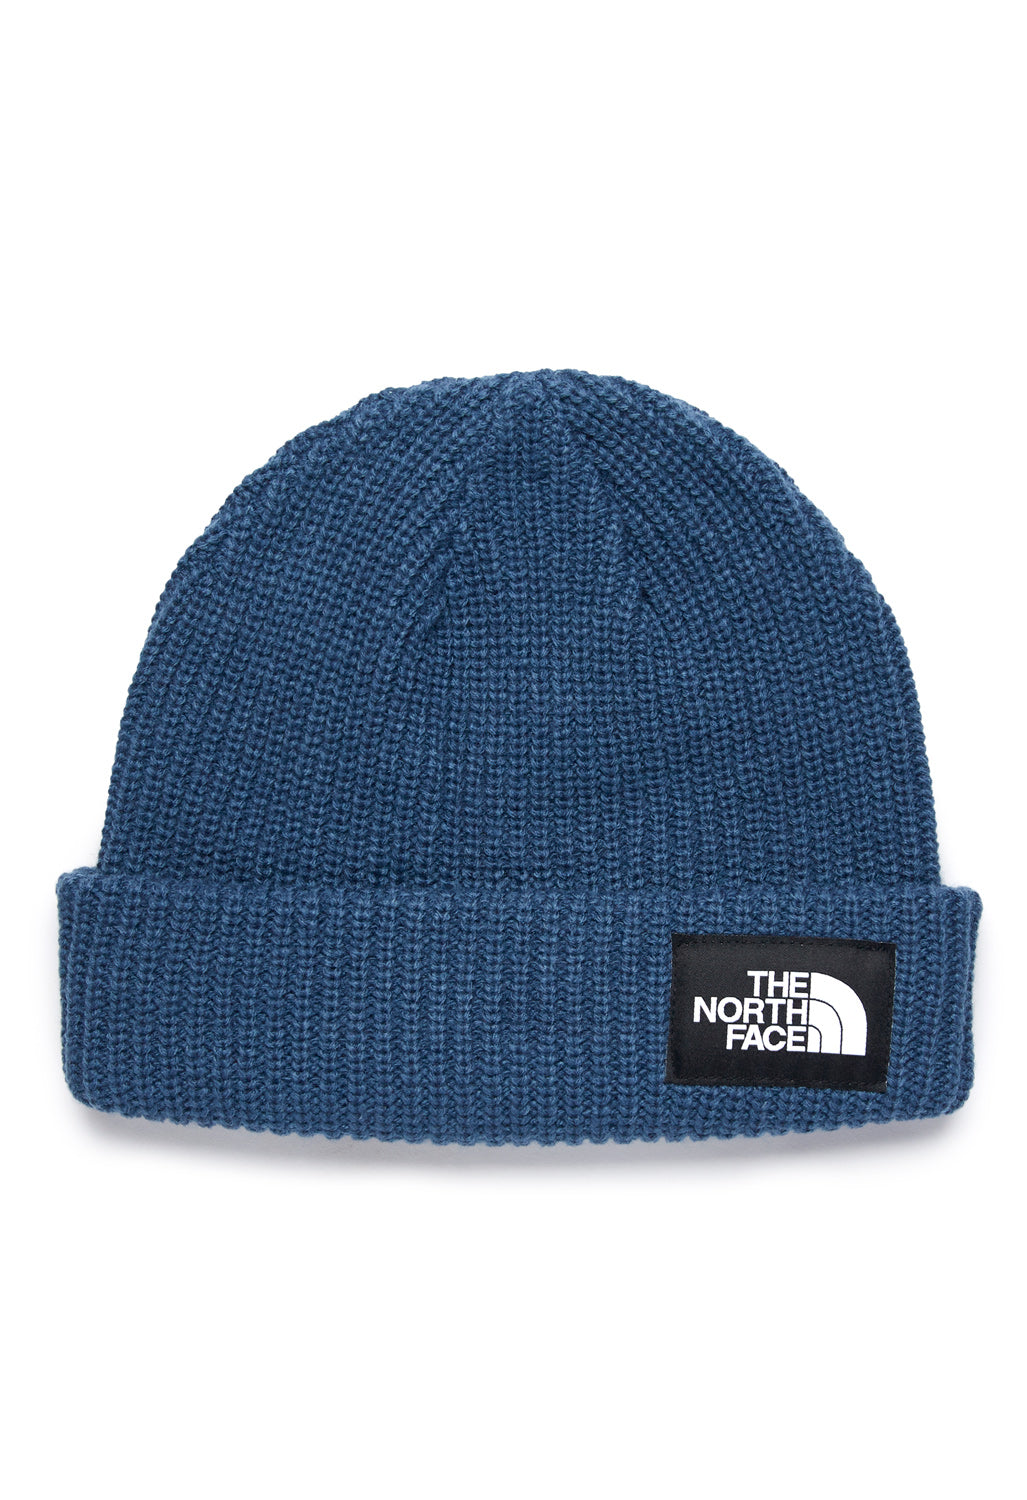 The North Face Salty Lined Beanie 8